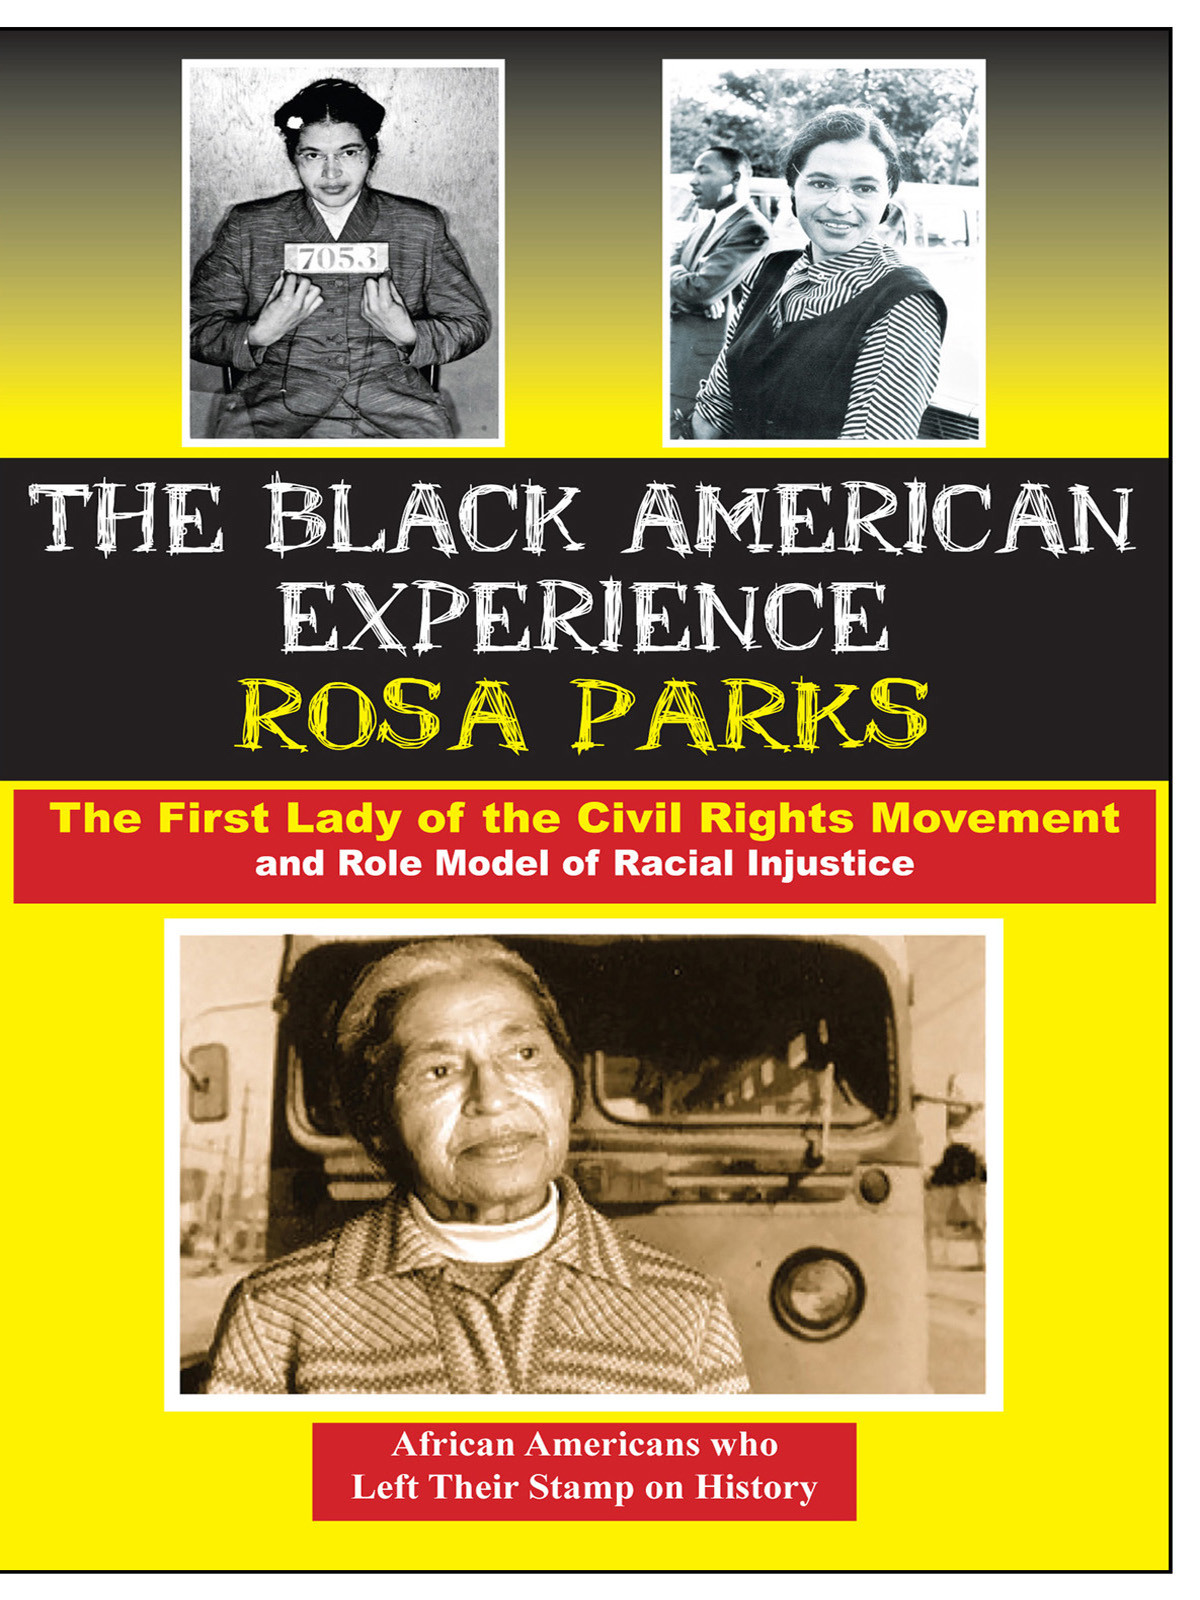 L5746 - Rosa Parks The First Lady of the Civil Rights Movement